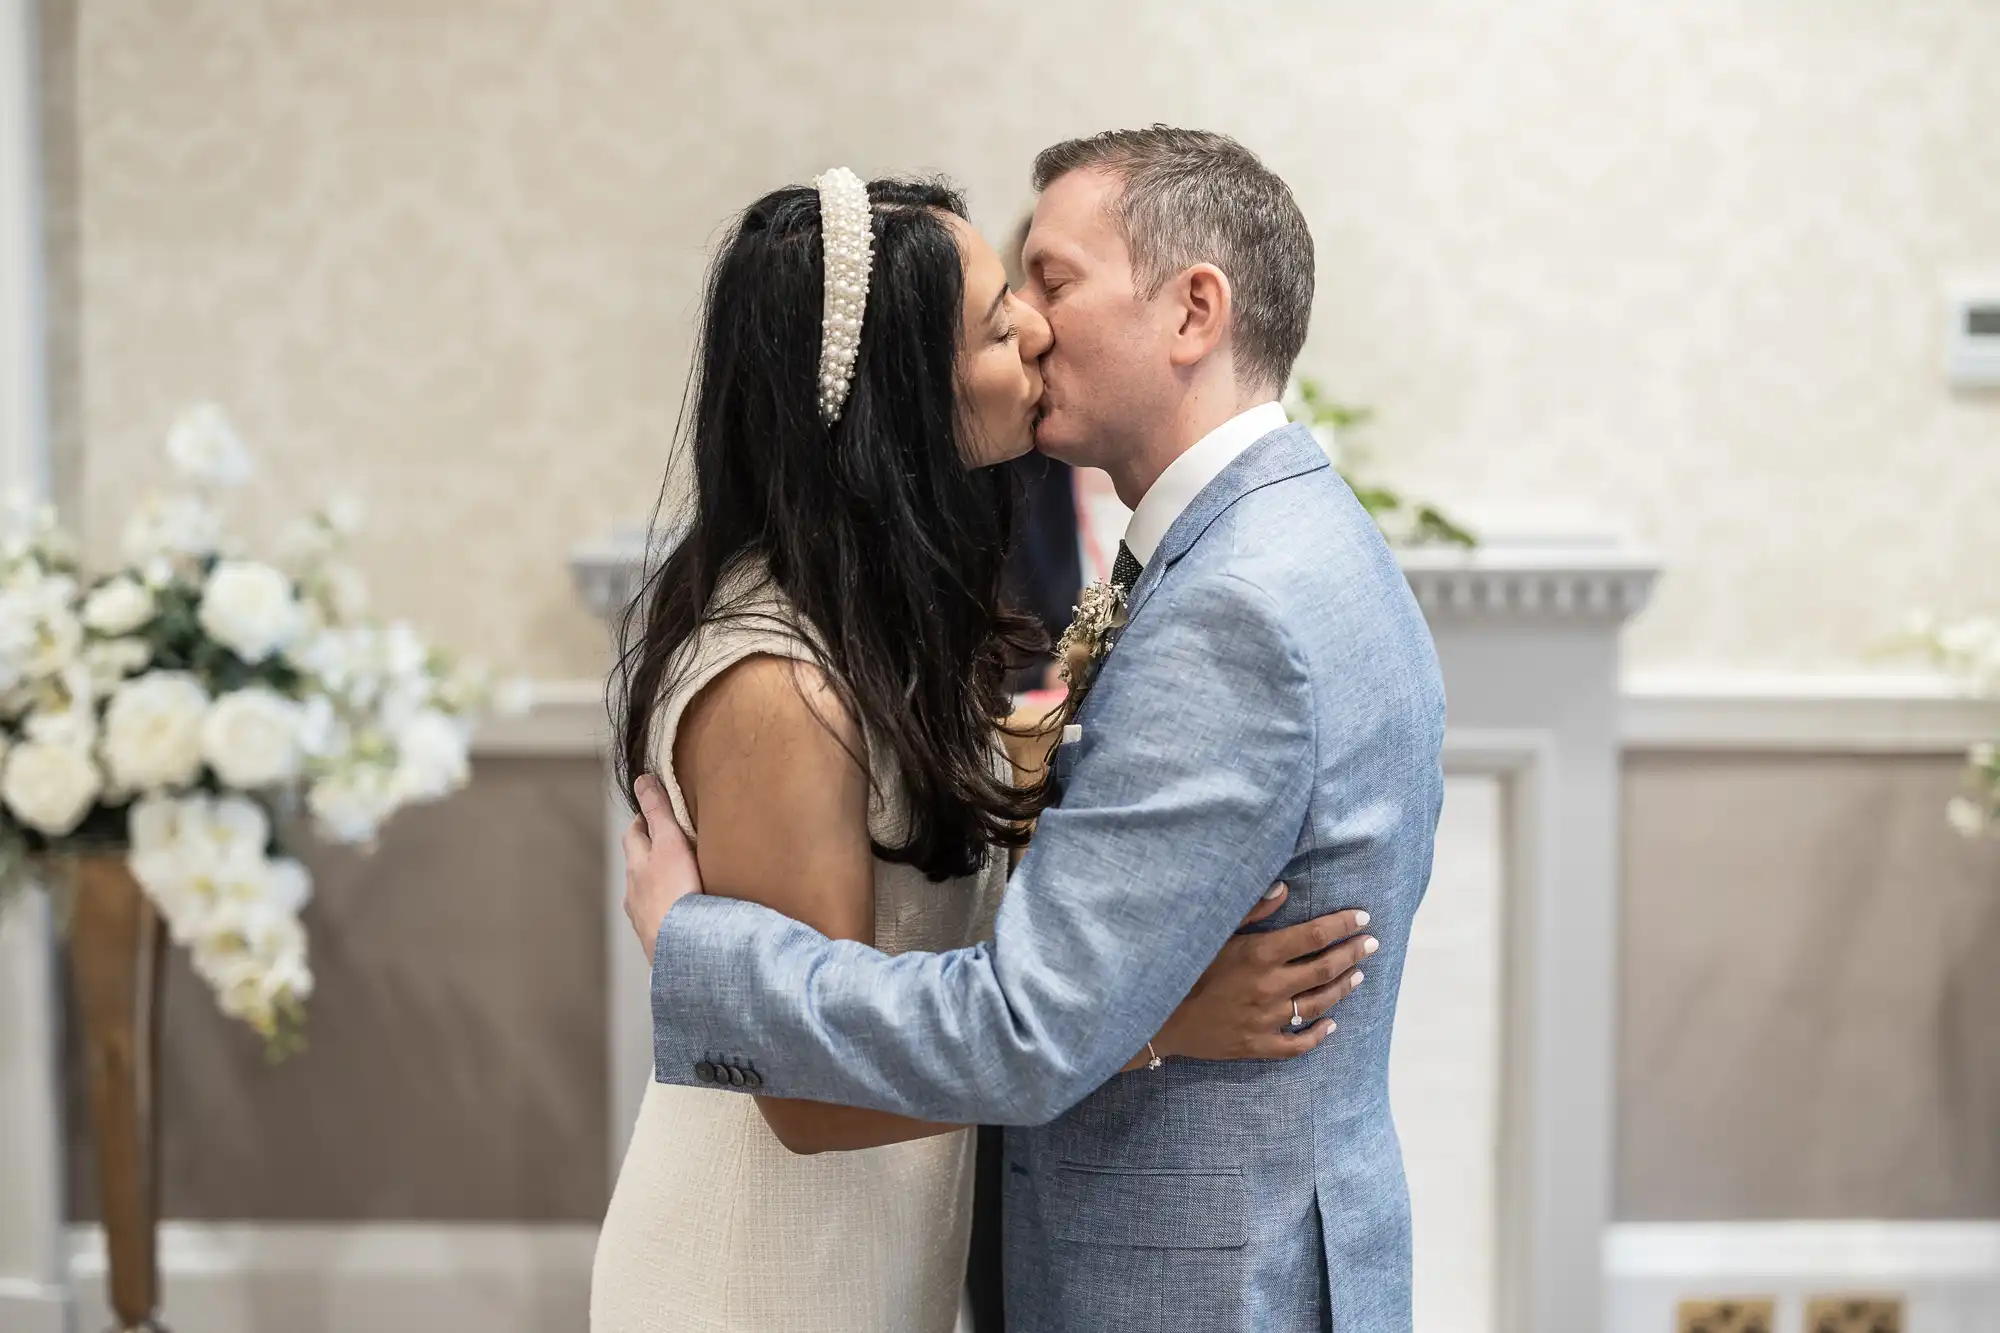 A couple, a woman in a white dress and a man in a light blue suit, share a kiss in a room decorated with white flowers.